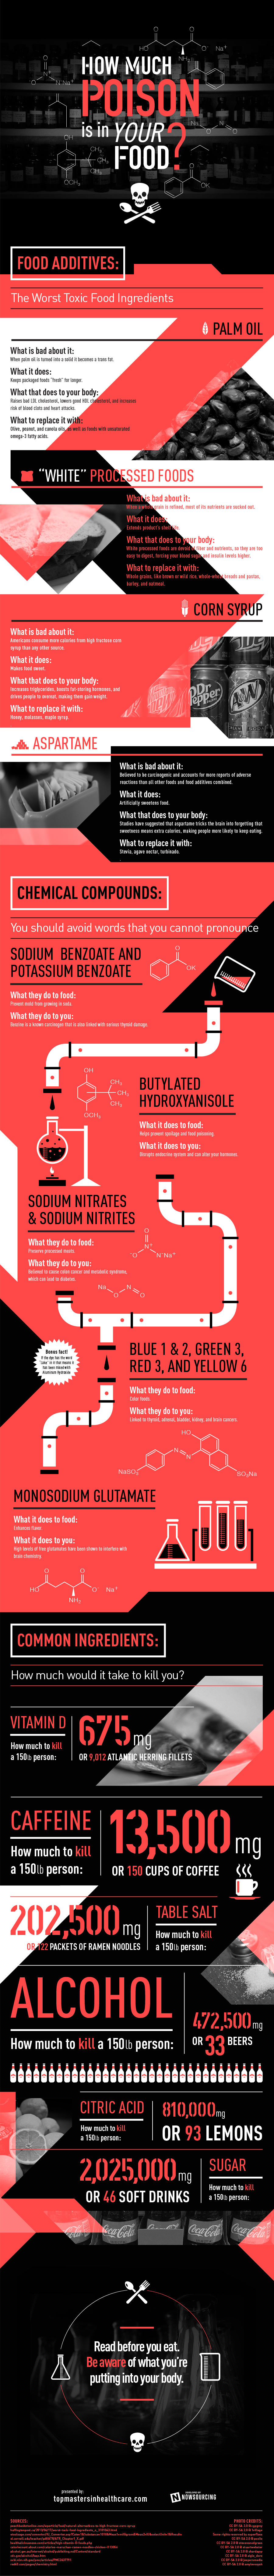 Are You Aware Of The Poison In Your Food? Infographic